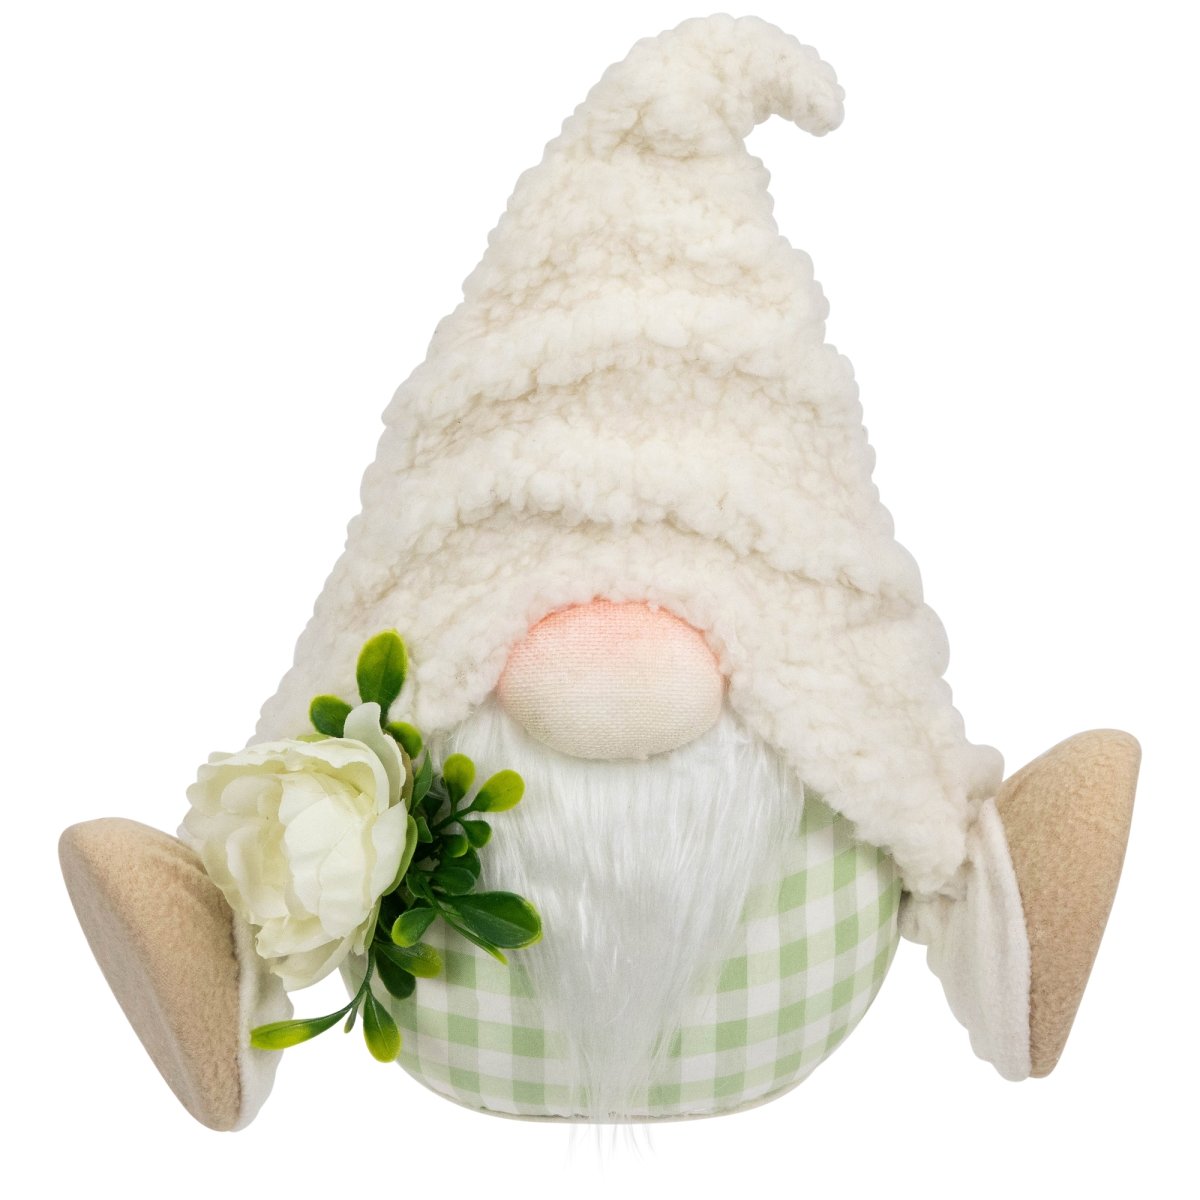 Picture of Northlight 35745095 10.5 x 10.25 x 3 in. Plush Sitting Gnome with Flower Spring Figurine